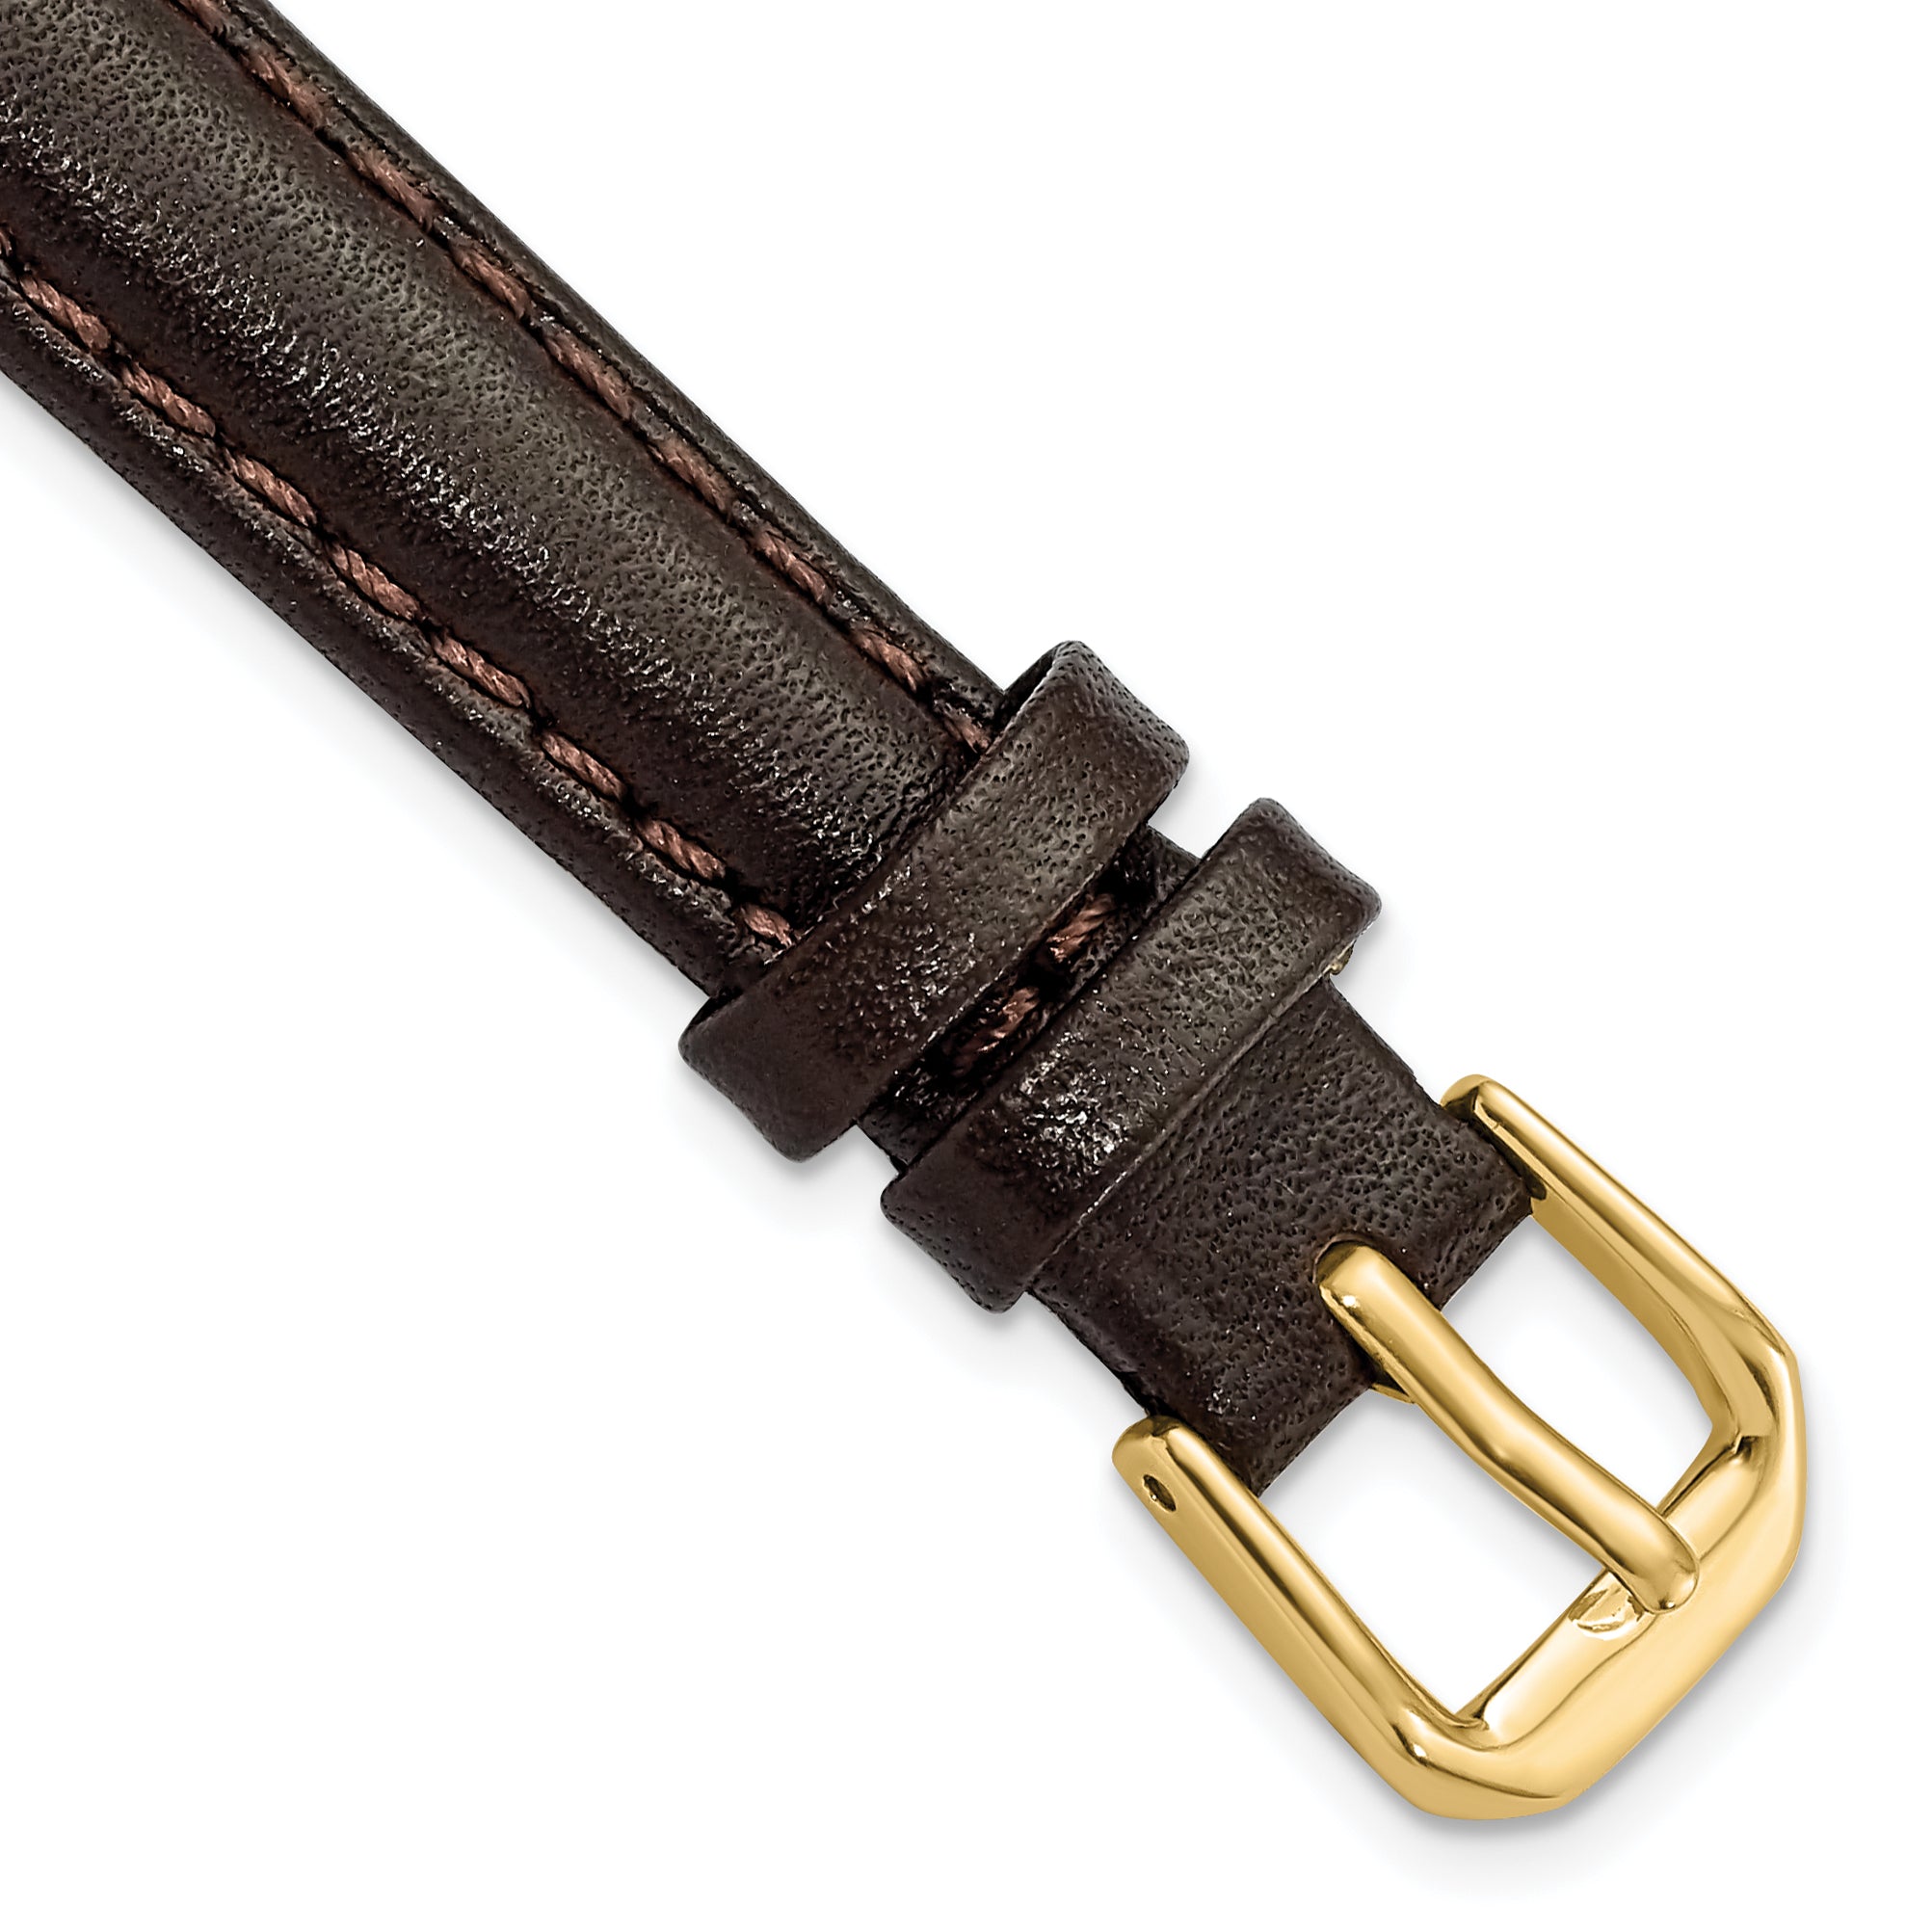 DeBeer 12mm Short Dark Brown Smooth Leather with Gold-tone Buckle 6.25 inch Watch Band